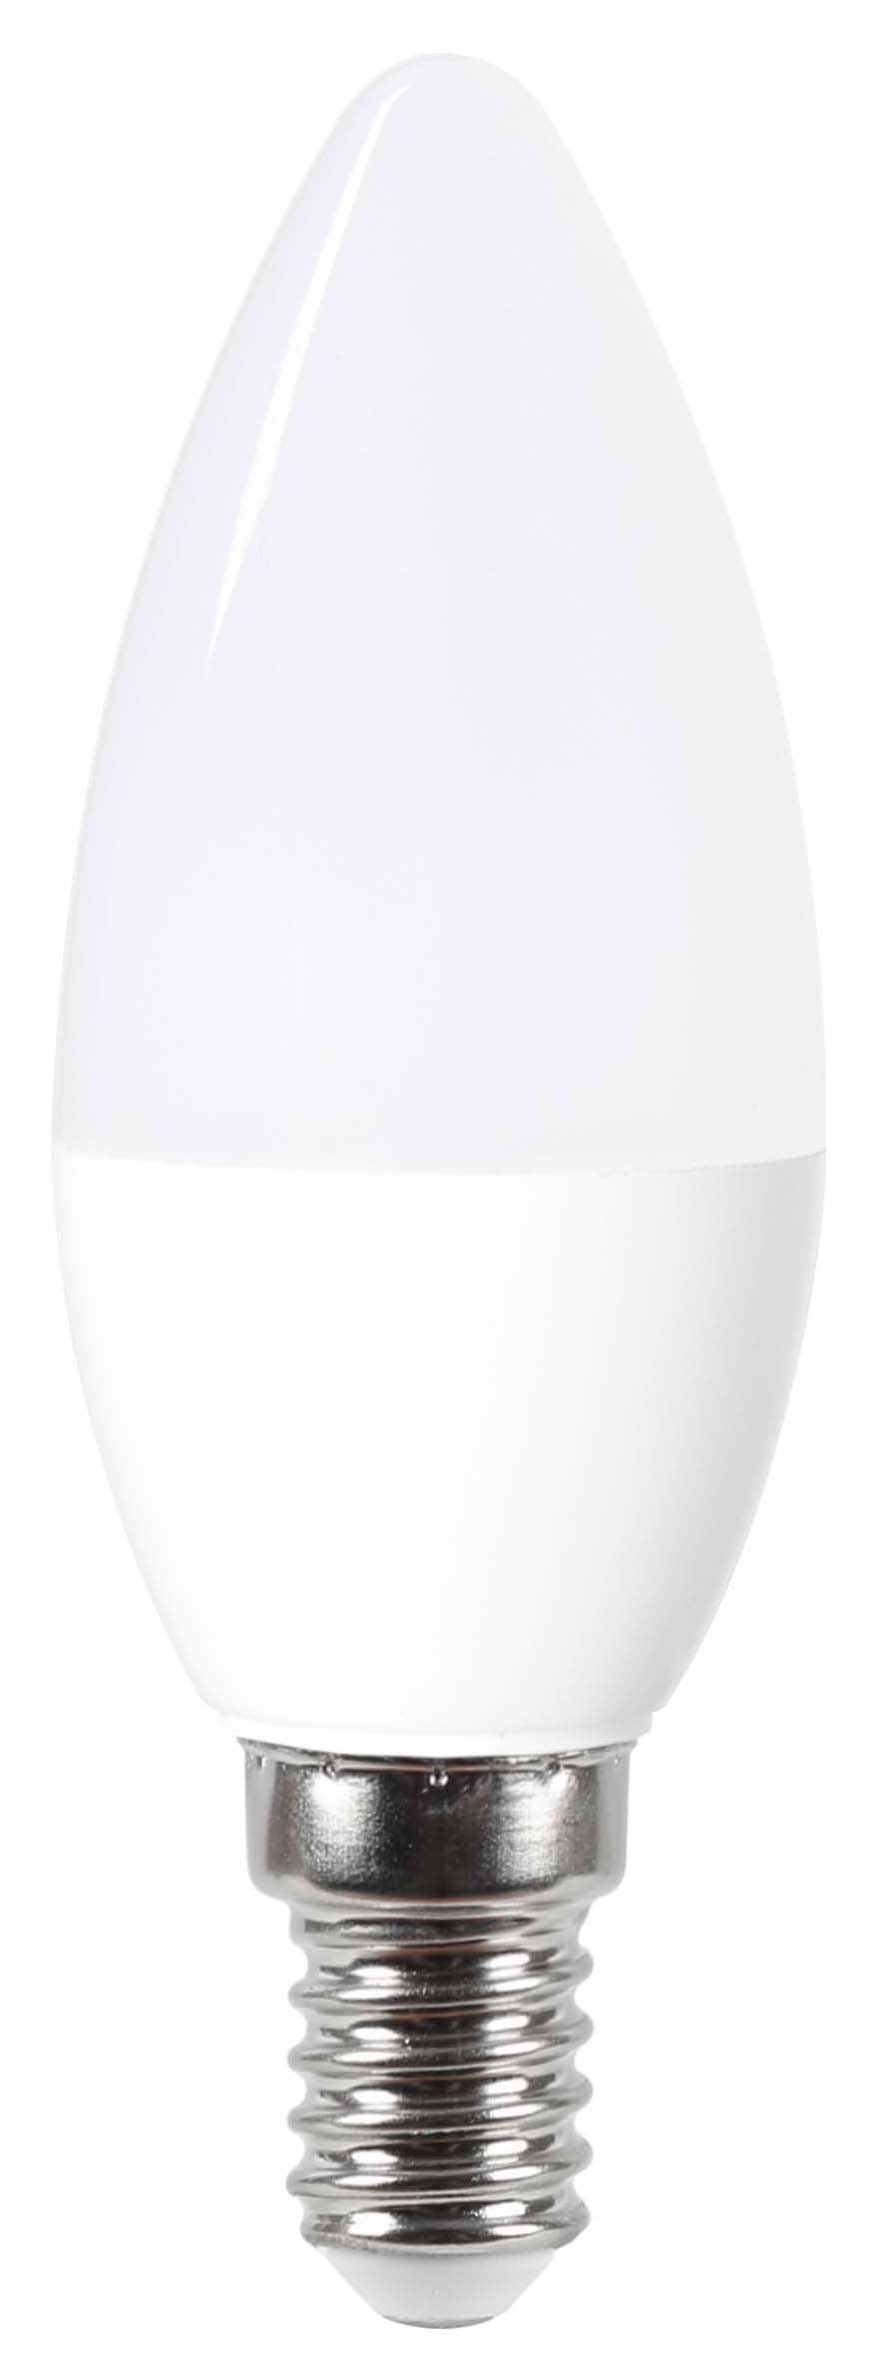 Image of Wickes Non-Dimmable Opal LED E14 Candle 4.9W Warm White Light Bulb